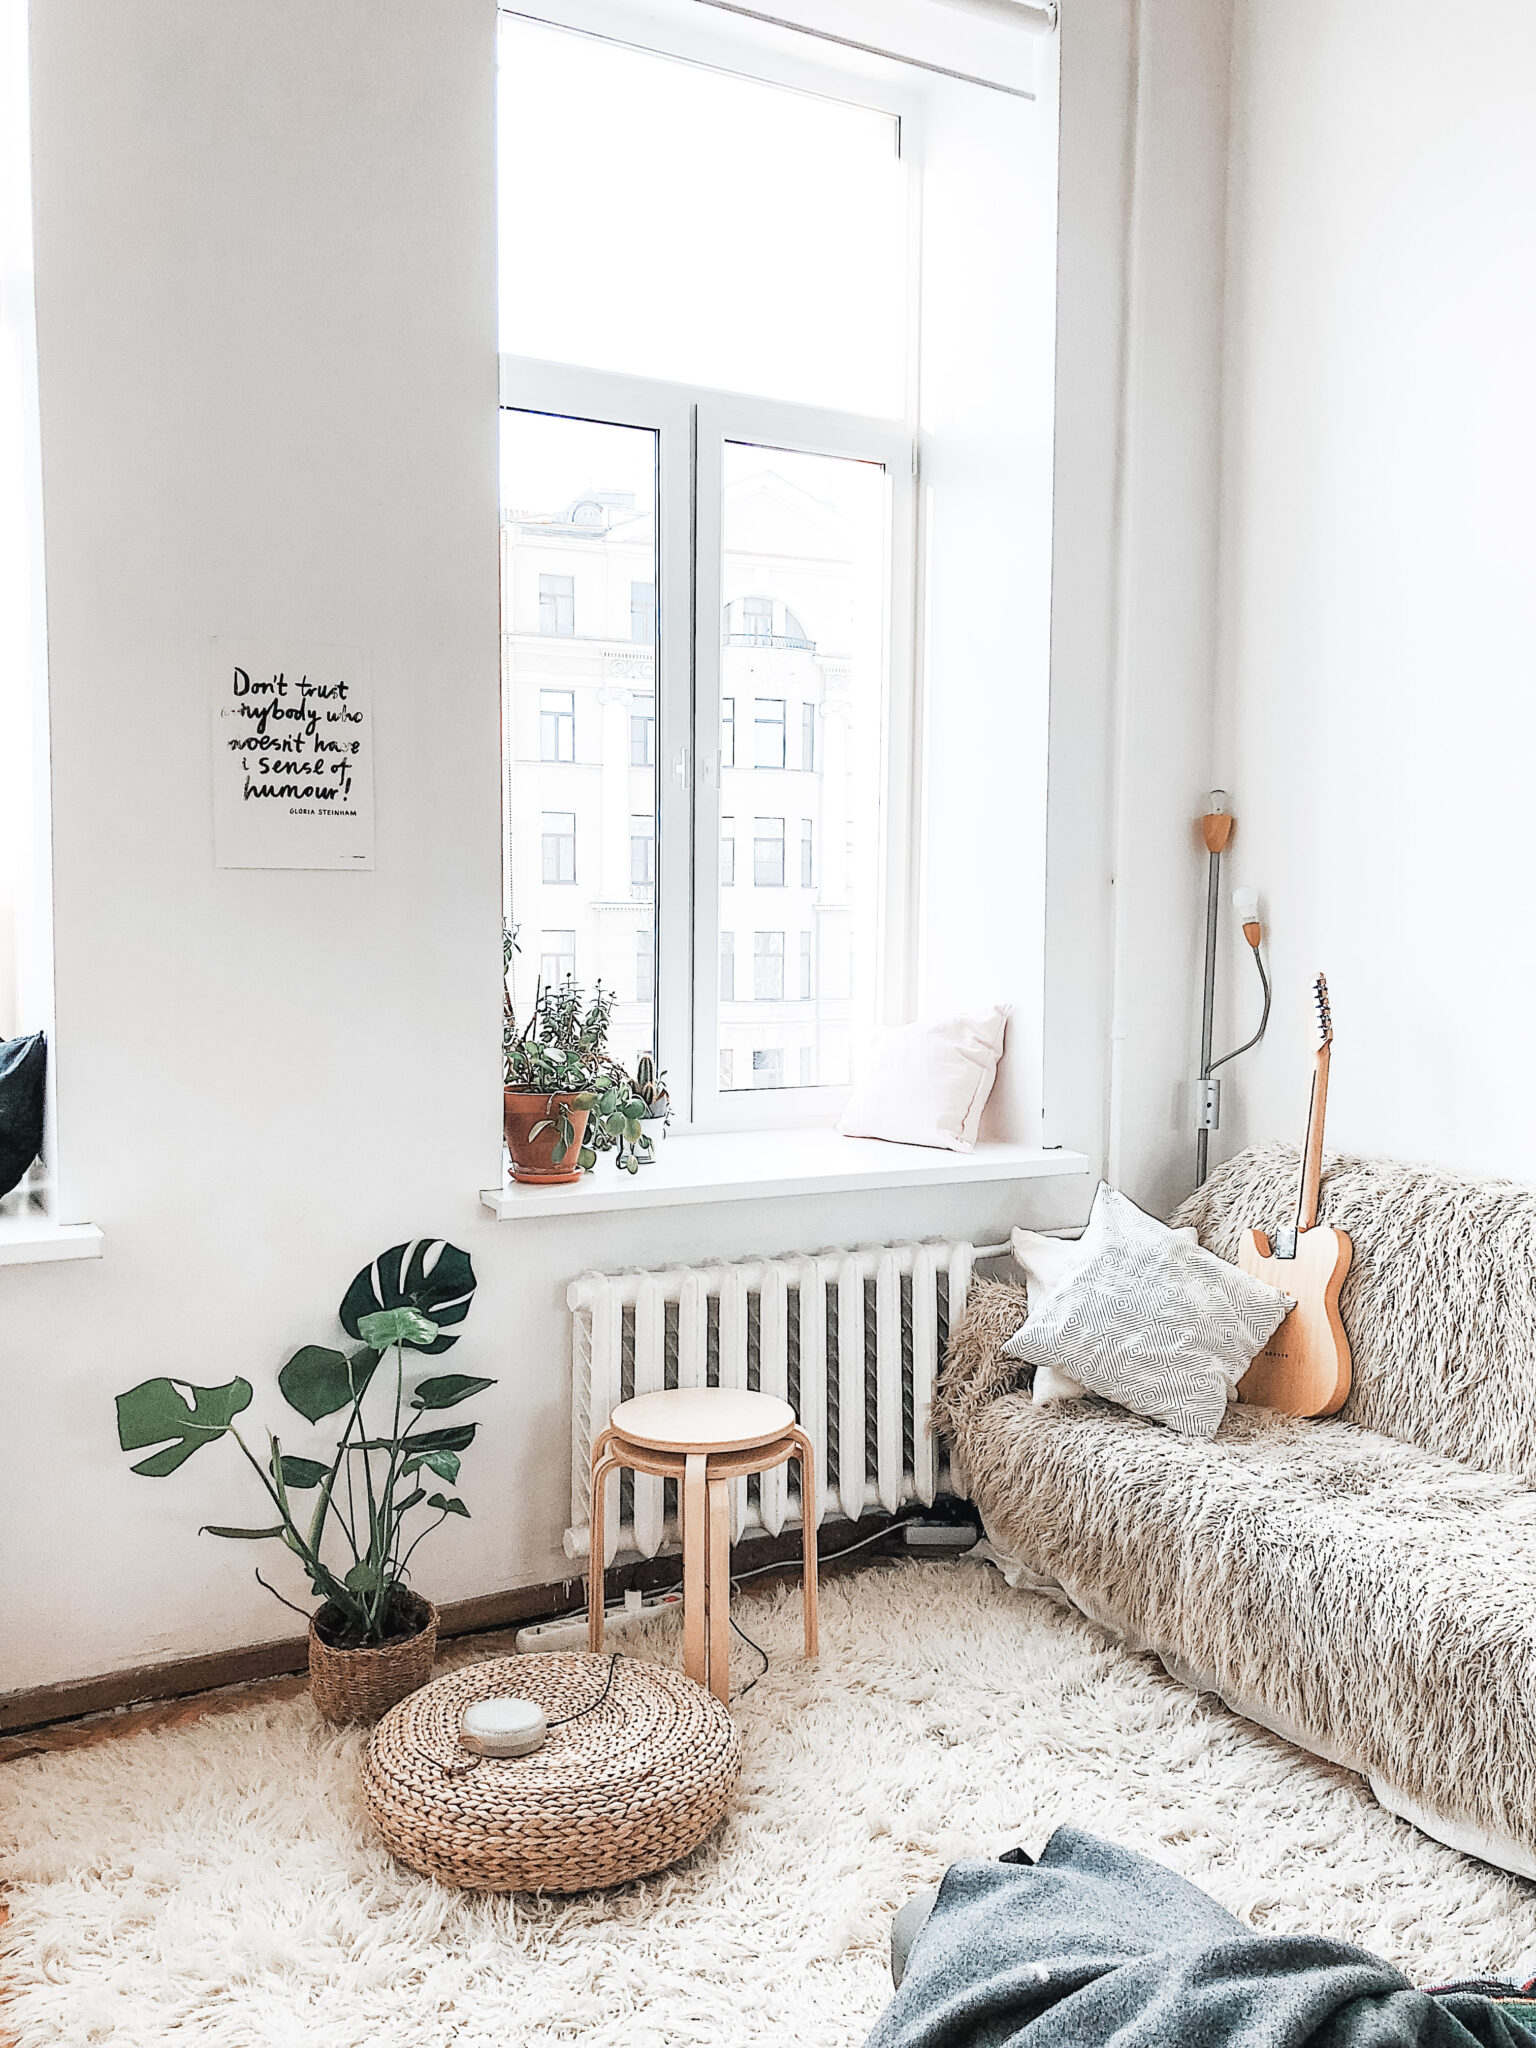 A bright and beautiful apartment is shown. The living area holds boho decor. This article covers how to rent an apartment.